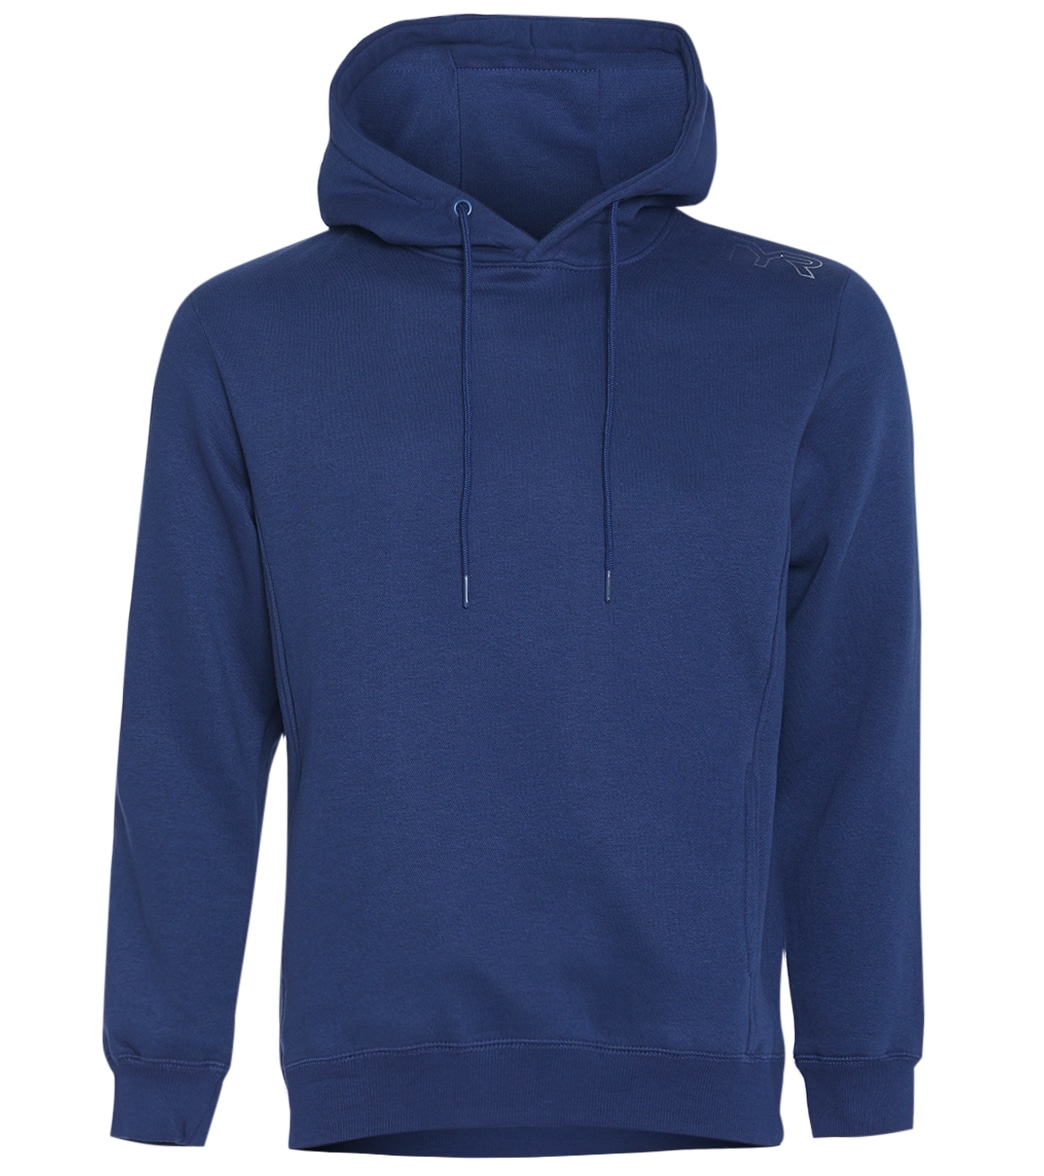 TYR Unisex Hoodie - Navy 3Xl Cotton/Polyester - Swimoutlet.com